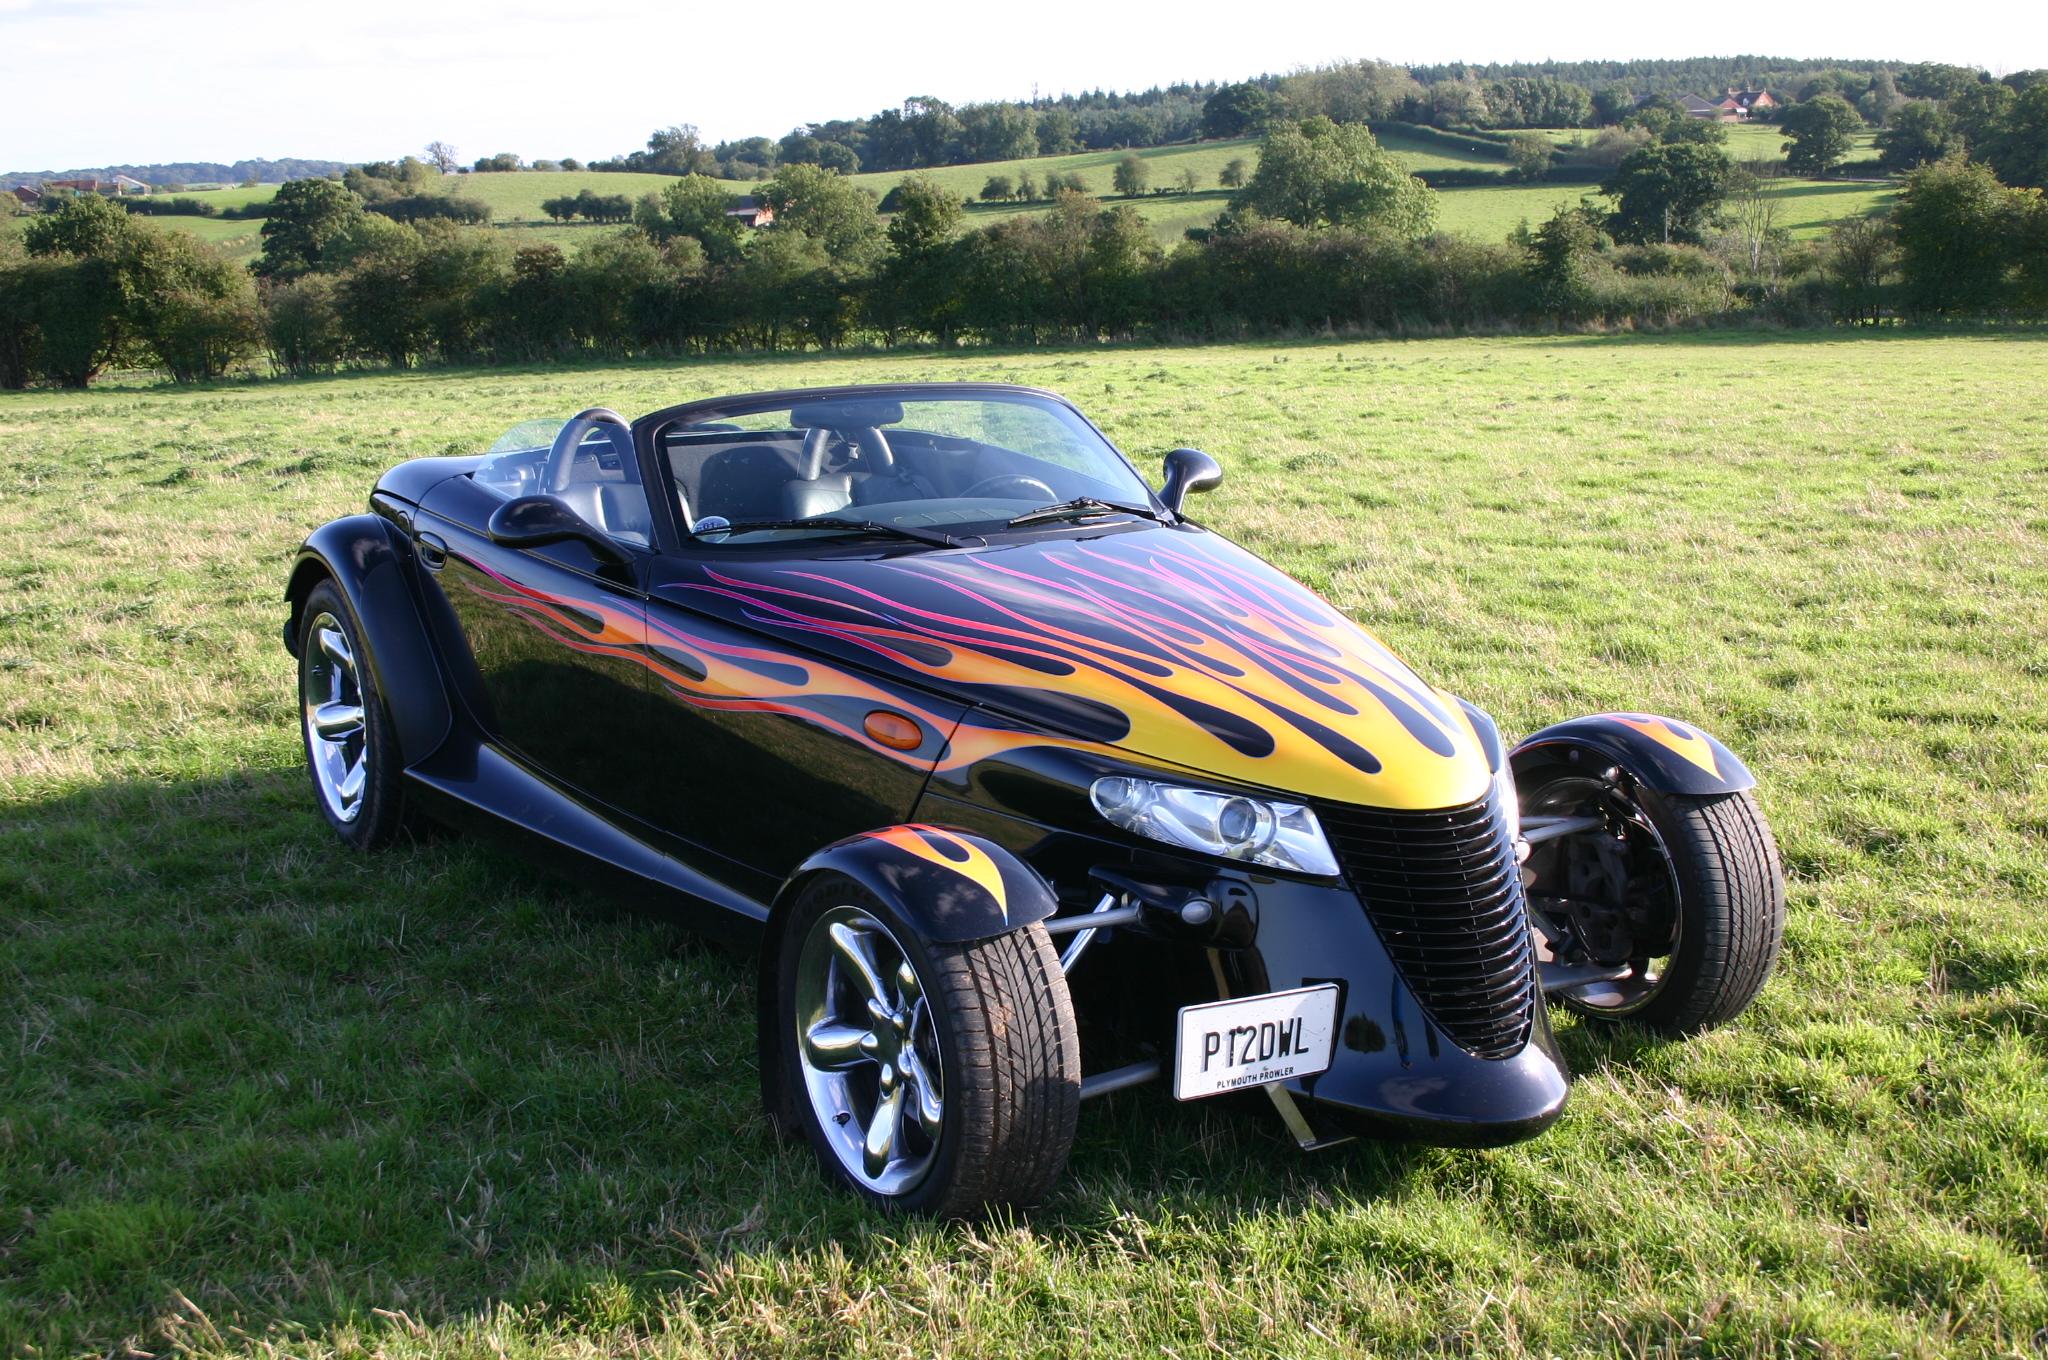 Plymouth Prowler Cars Image Femalecelebrity